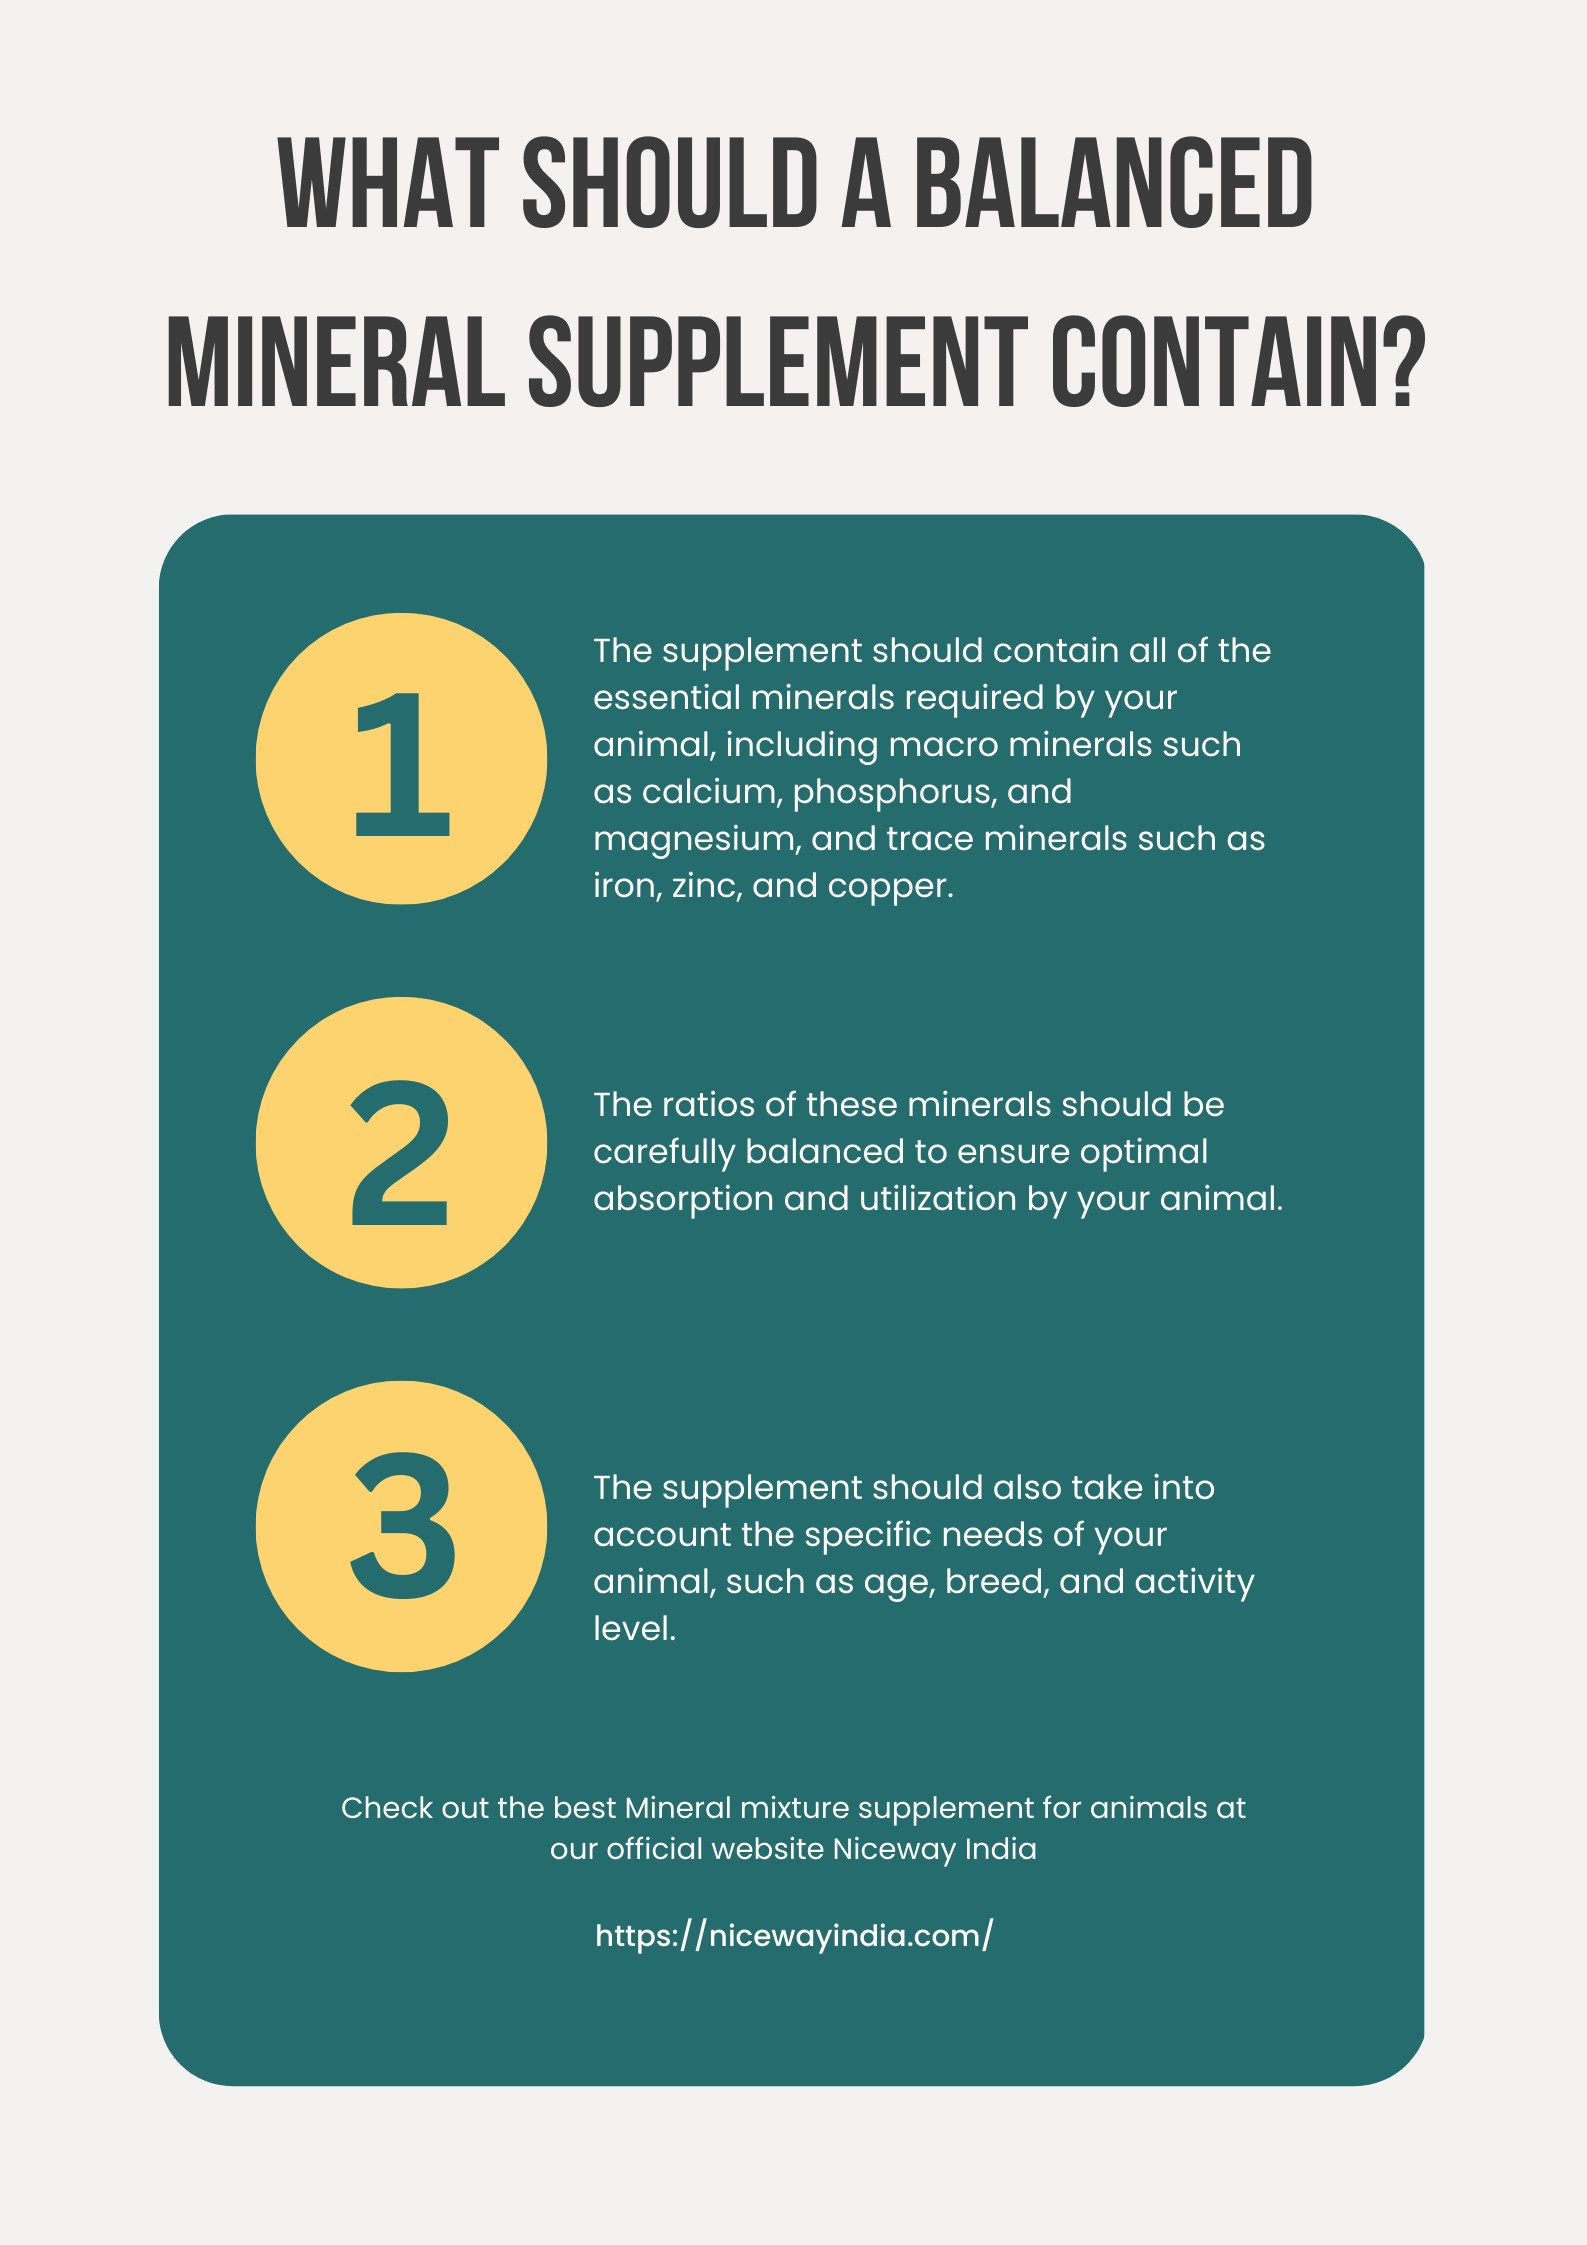 What Should a Balanced Mineral Supplement Contain?